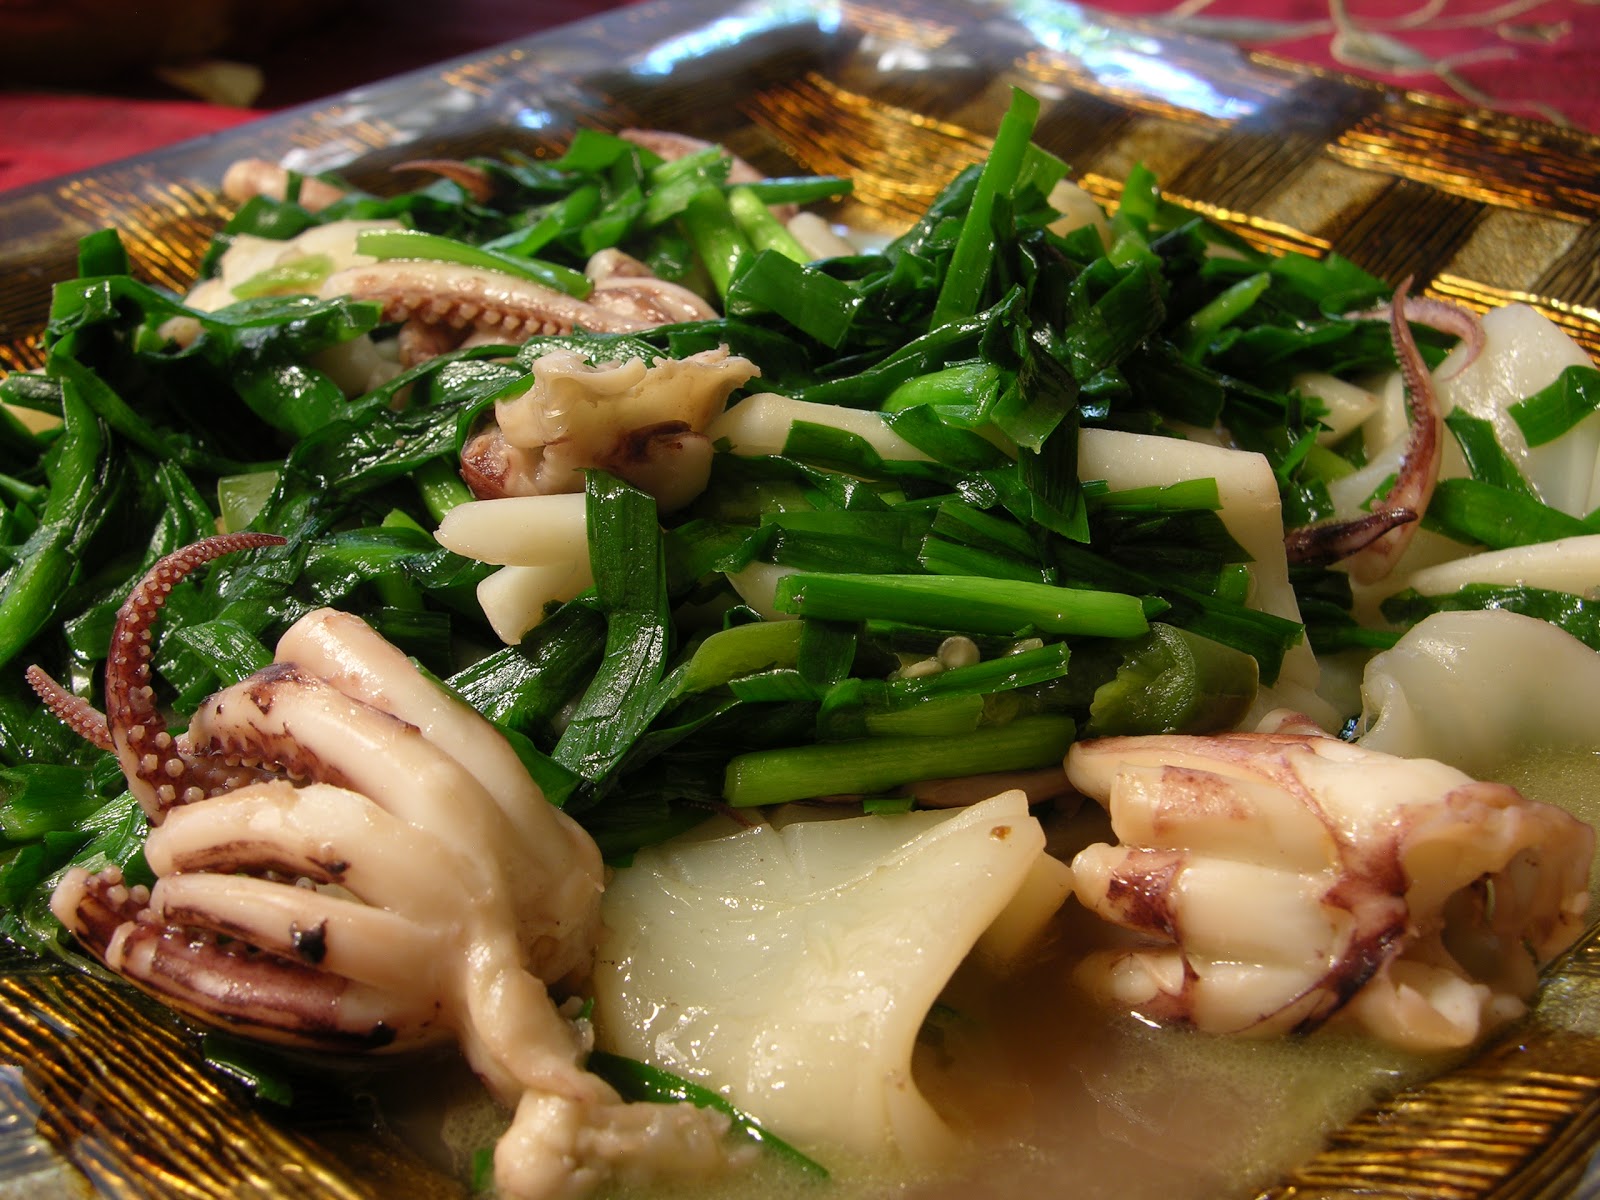 Fun Chinese Cooking Spring Tulip S Recipes Stir Fried Squid With Chinese Leek And Jalapeno É­èéæ¤çé±¿é±¼